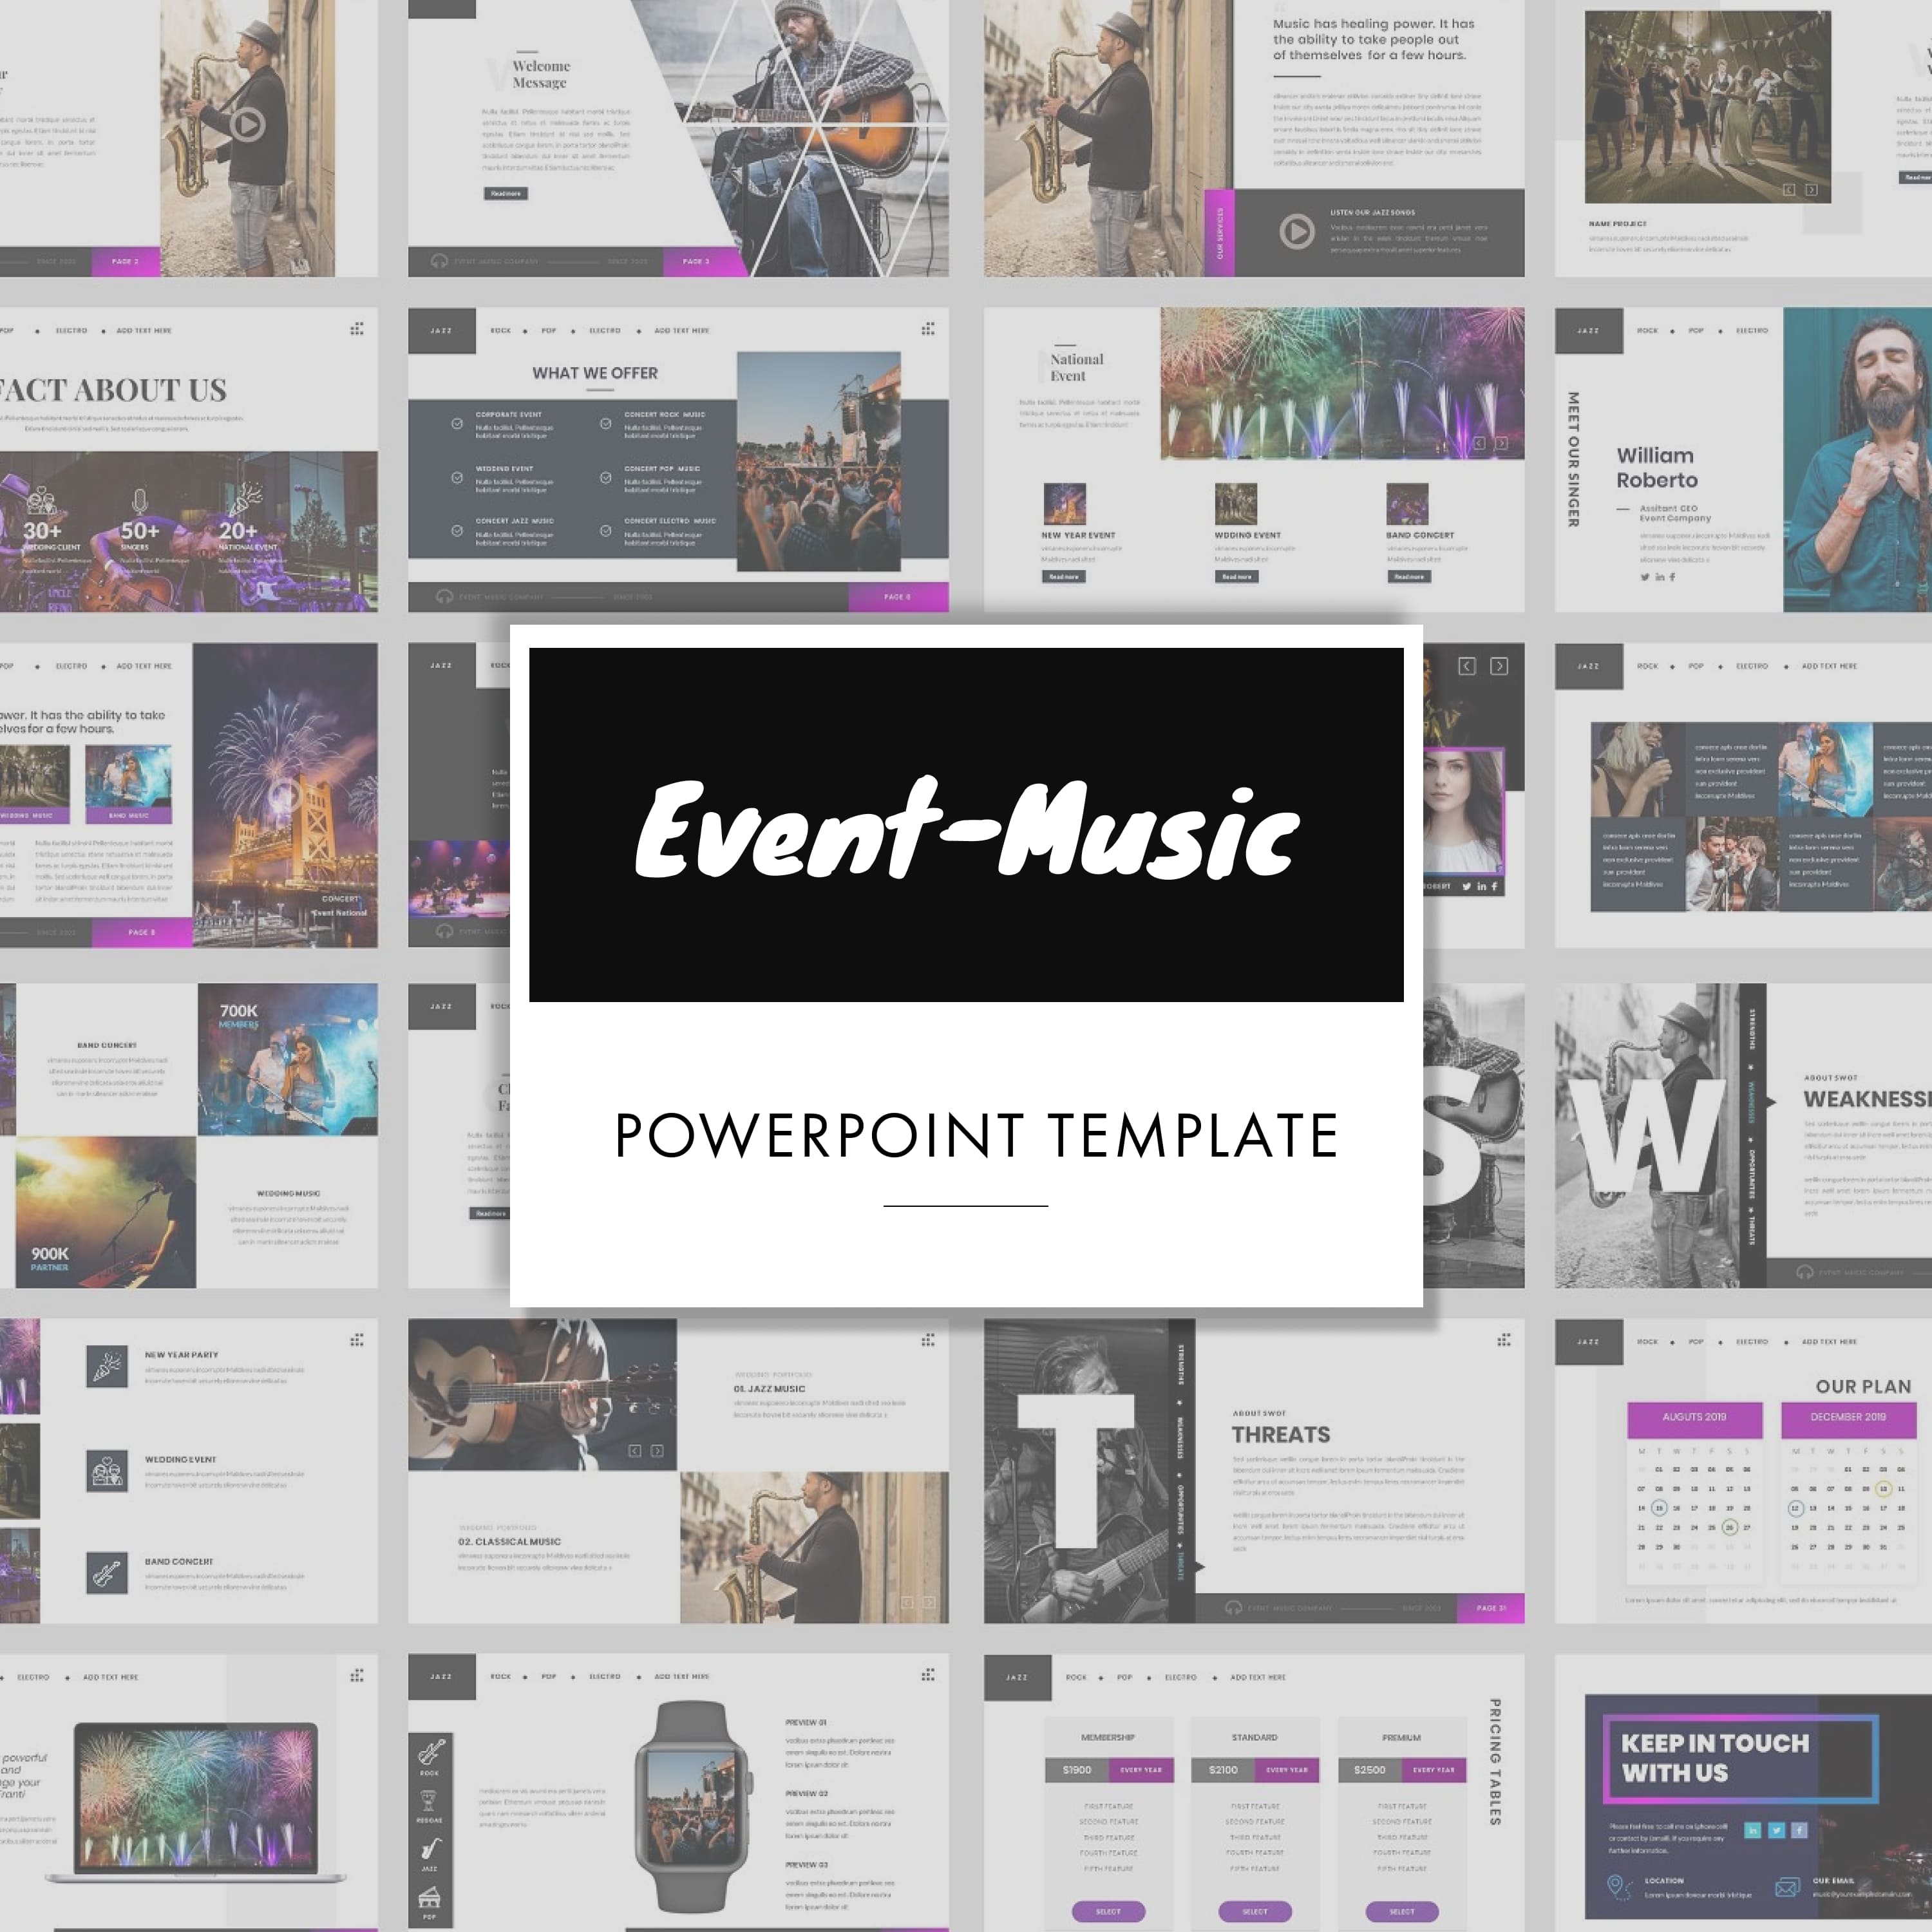 Event-Music PowerPoint Template.